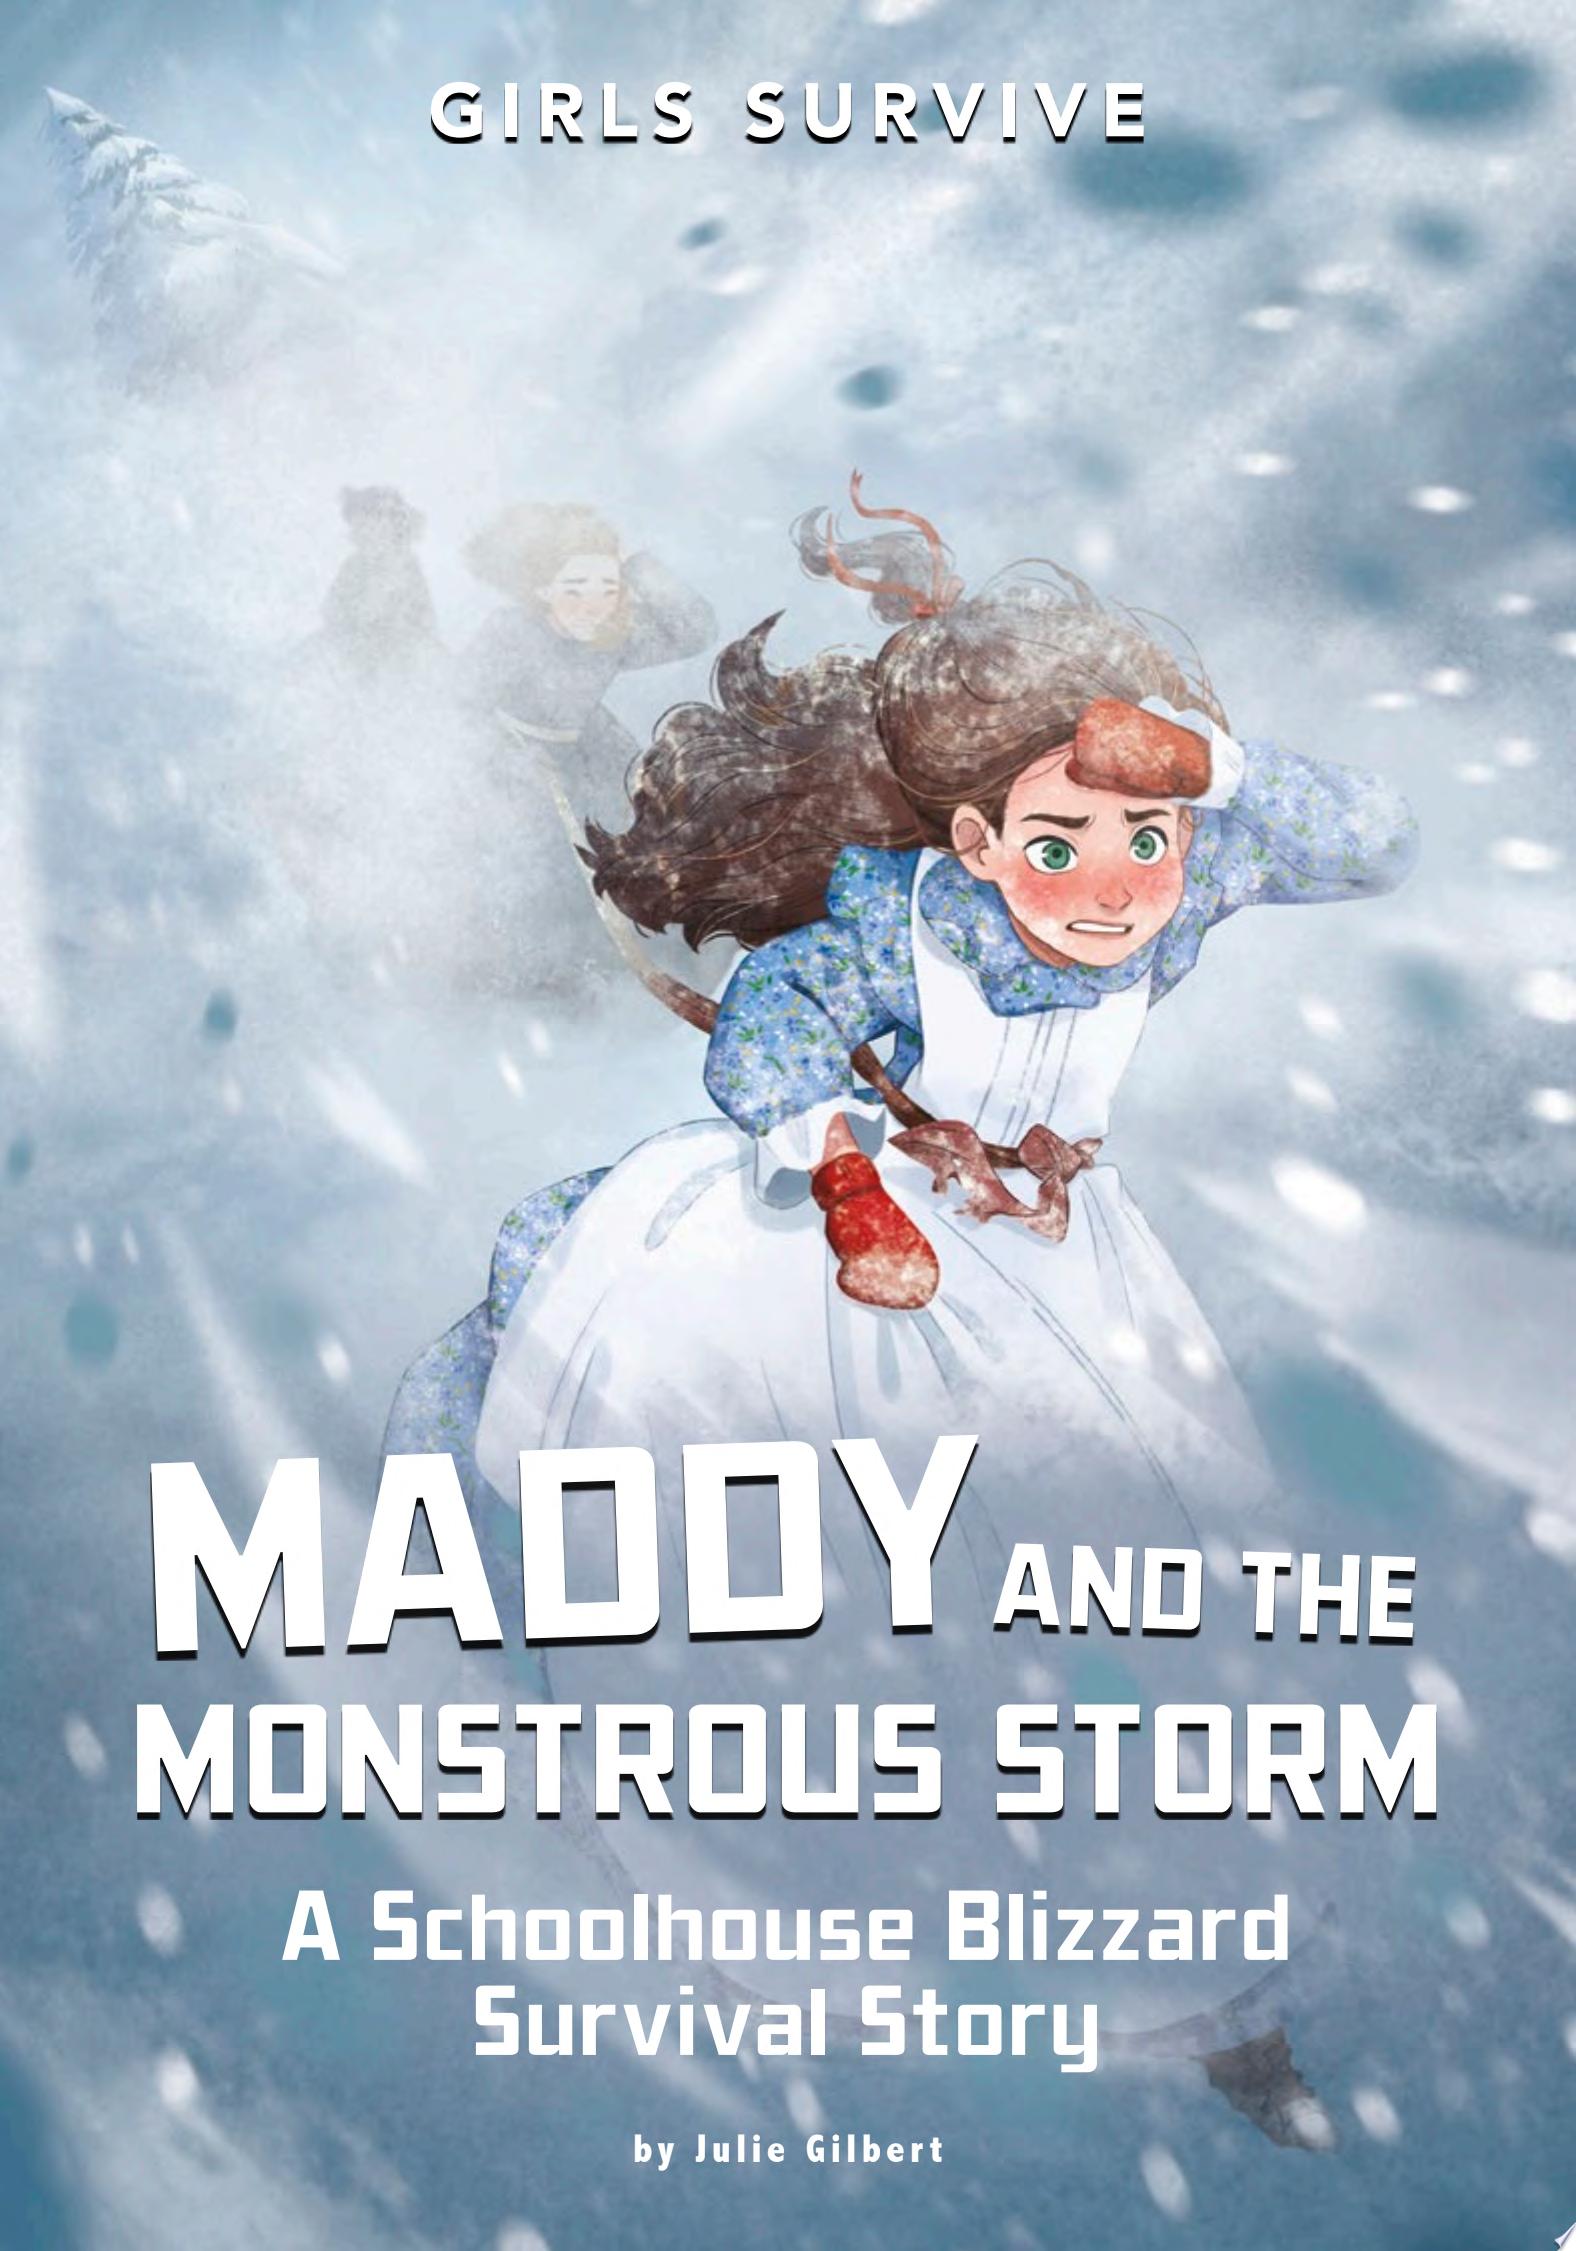 Image for "Maddy and the Monstrous Storm"